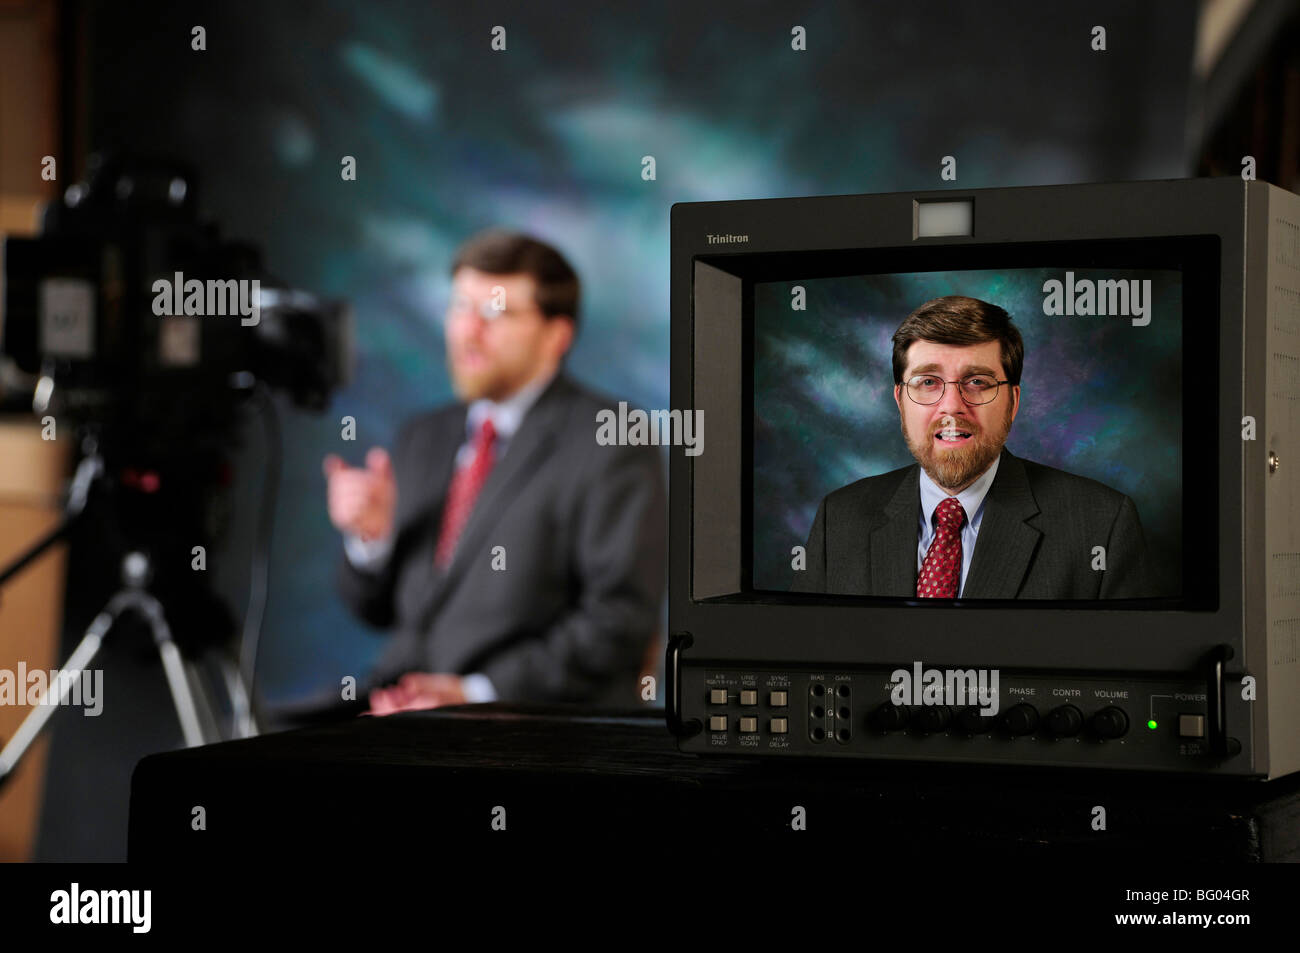 Monitor in production studio showing newsman or pundit talking to television or video camera Horizontal Stock Photo